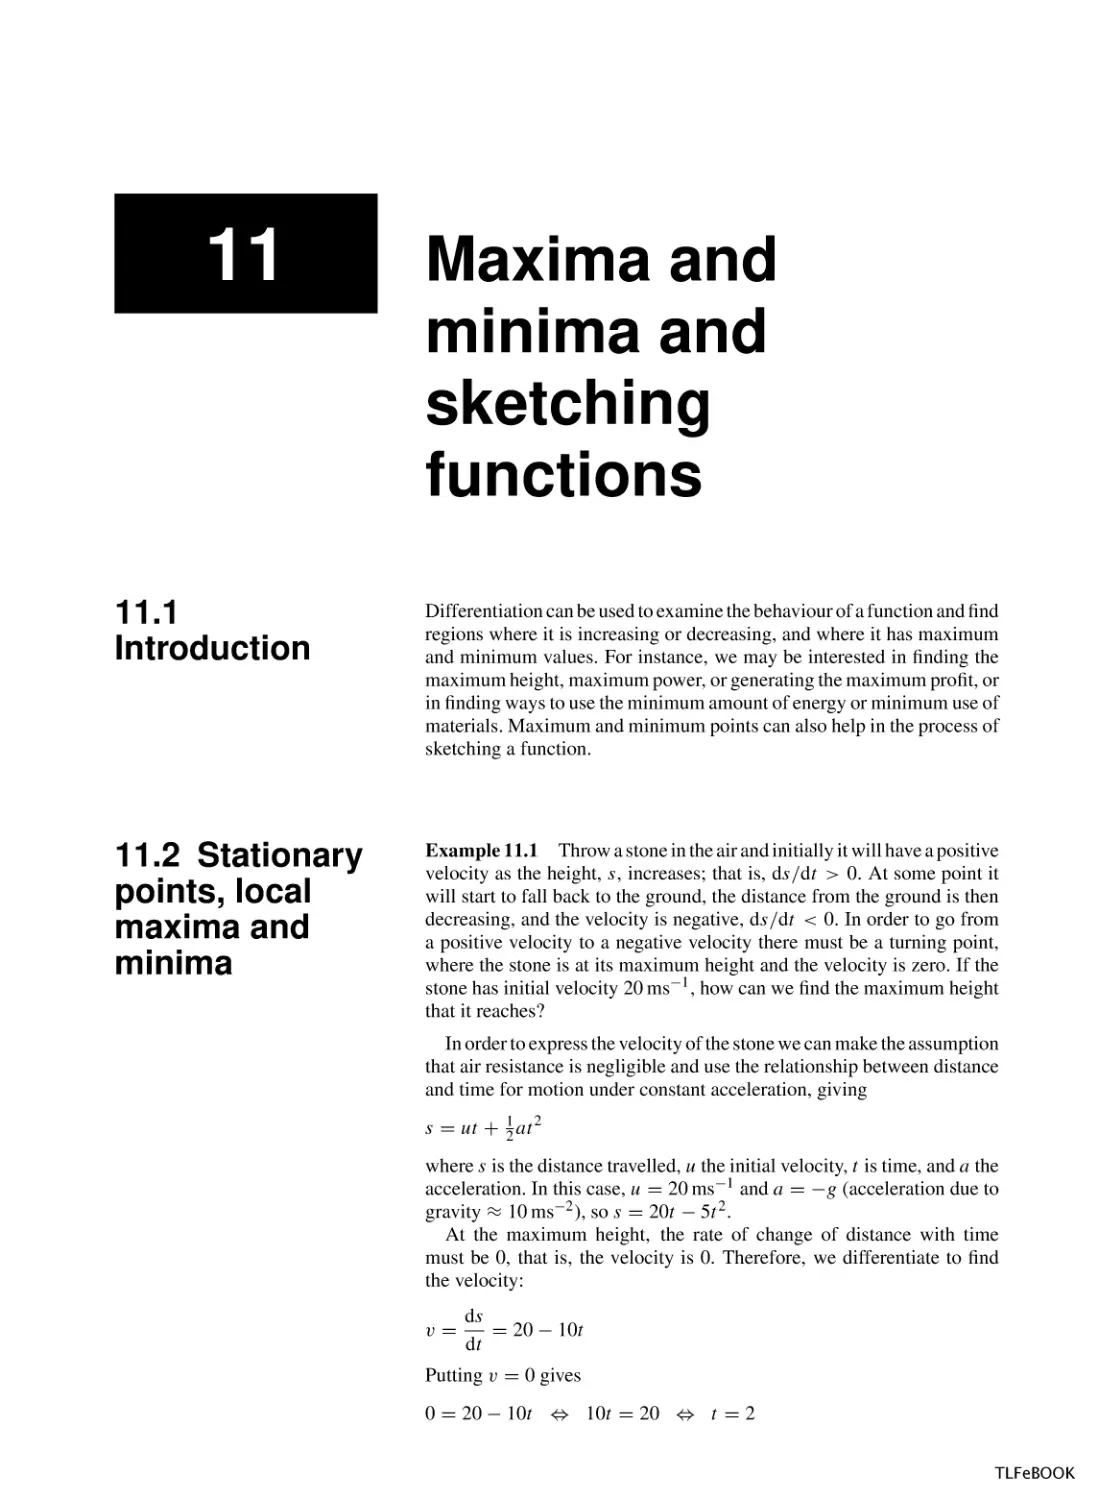 Maxima and Minima and Sketching Functions